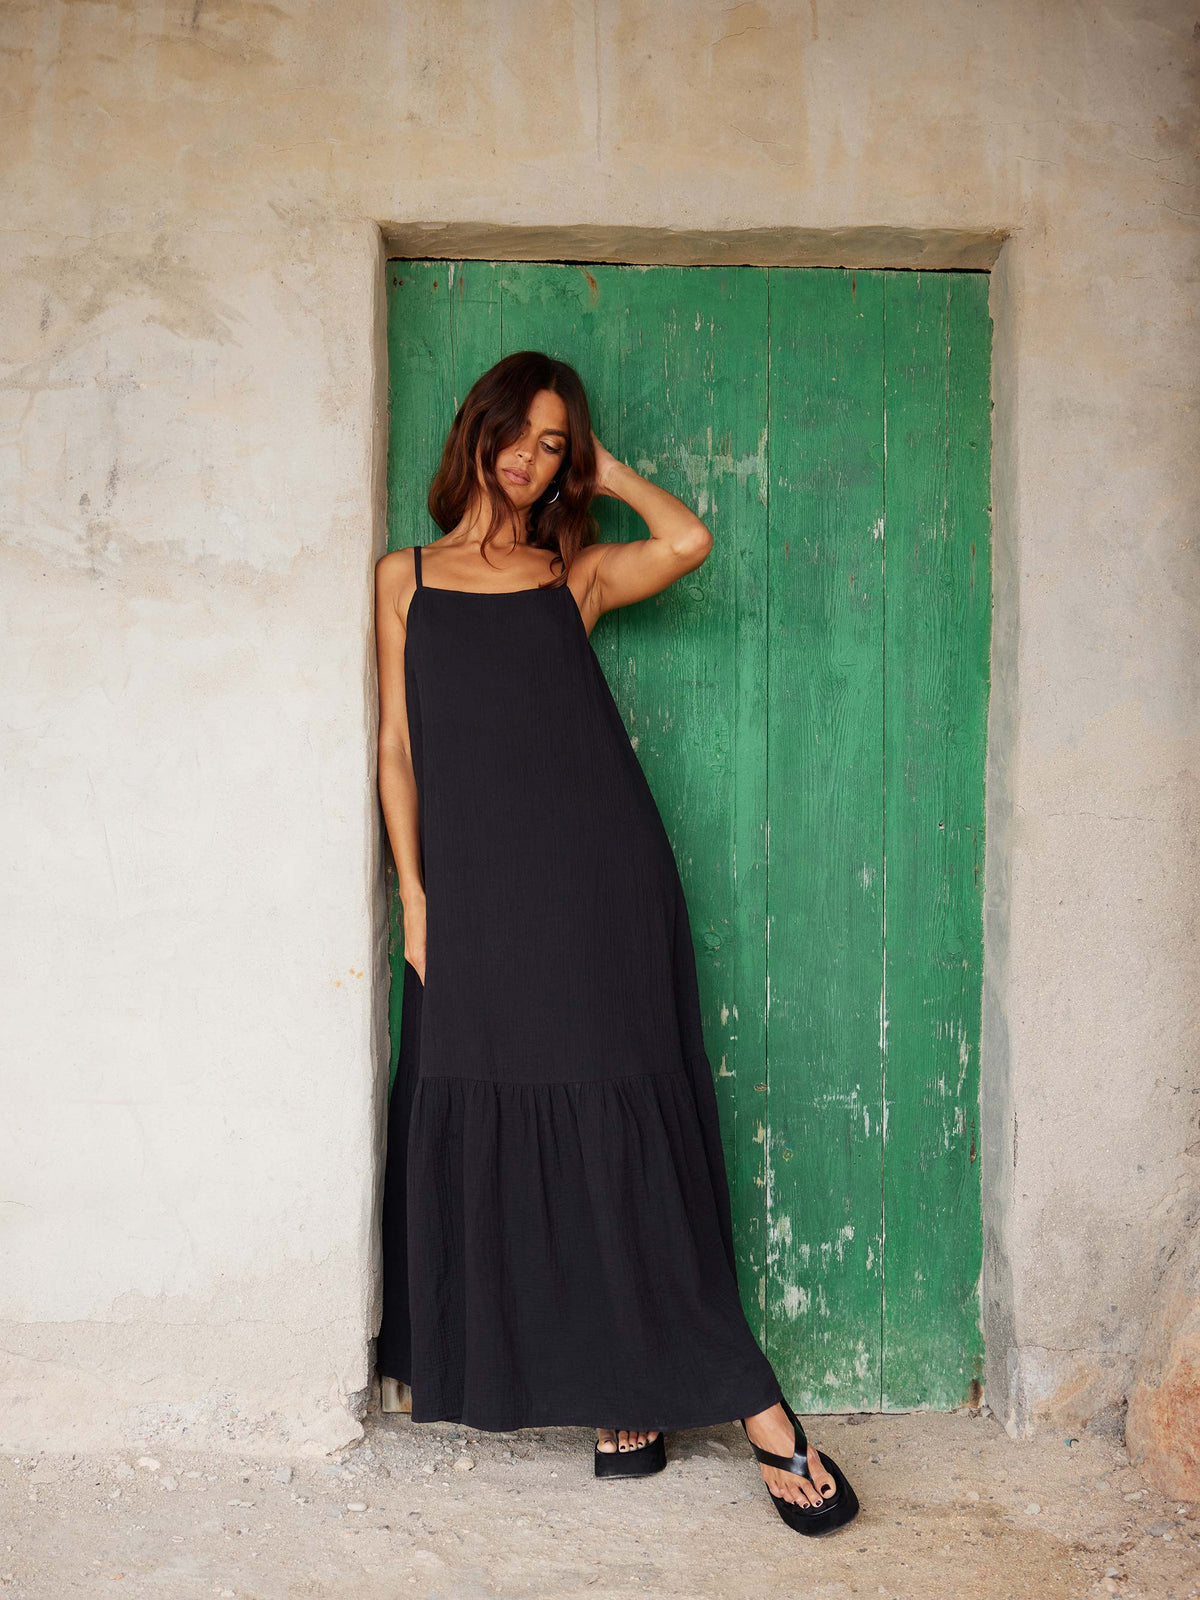 Black Tiered Hem Strappy Cheesecloth Dress